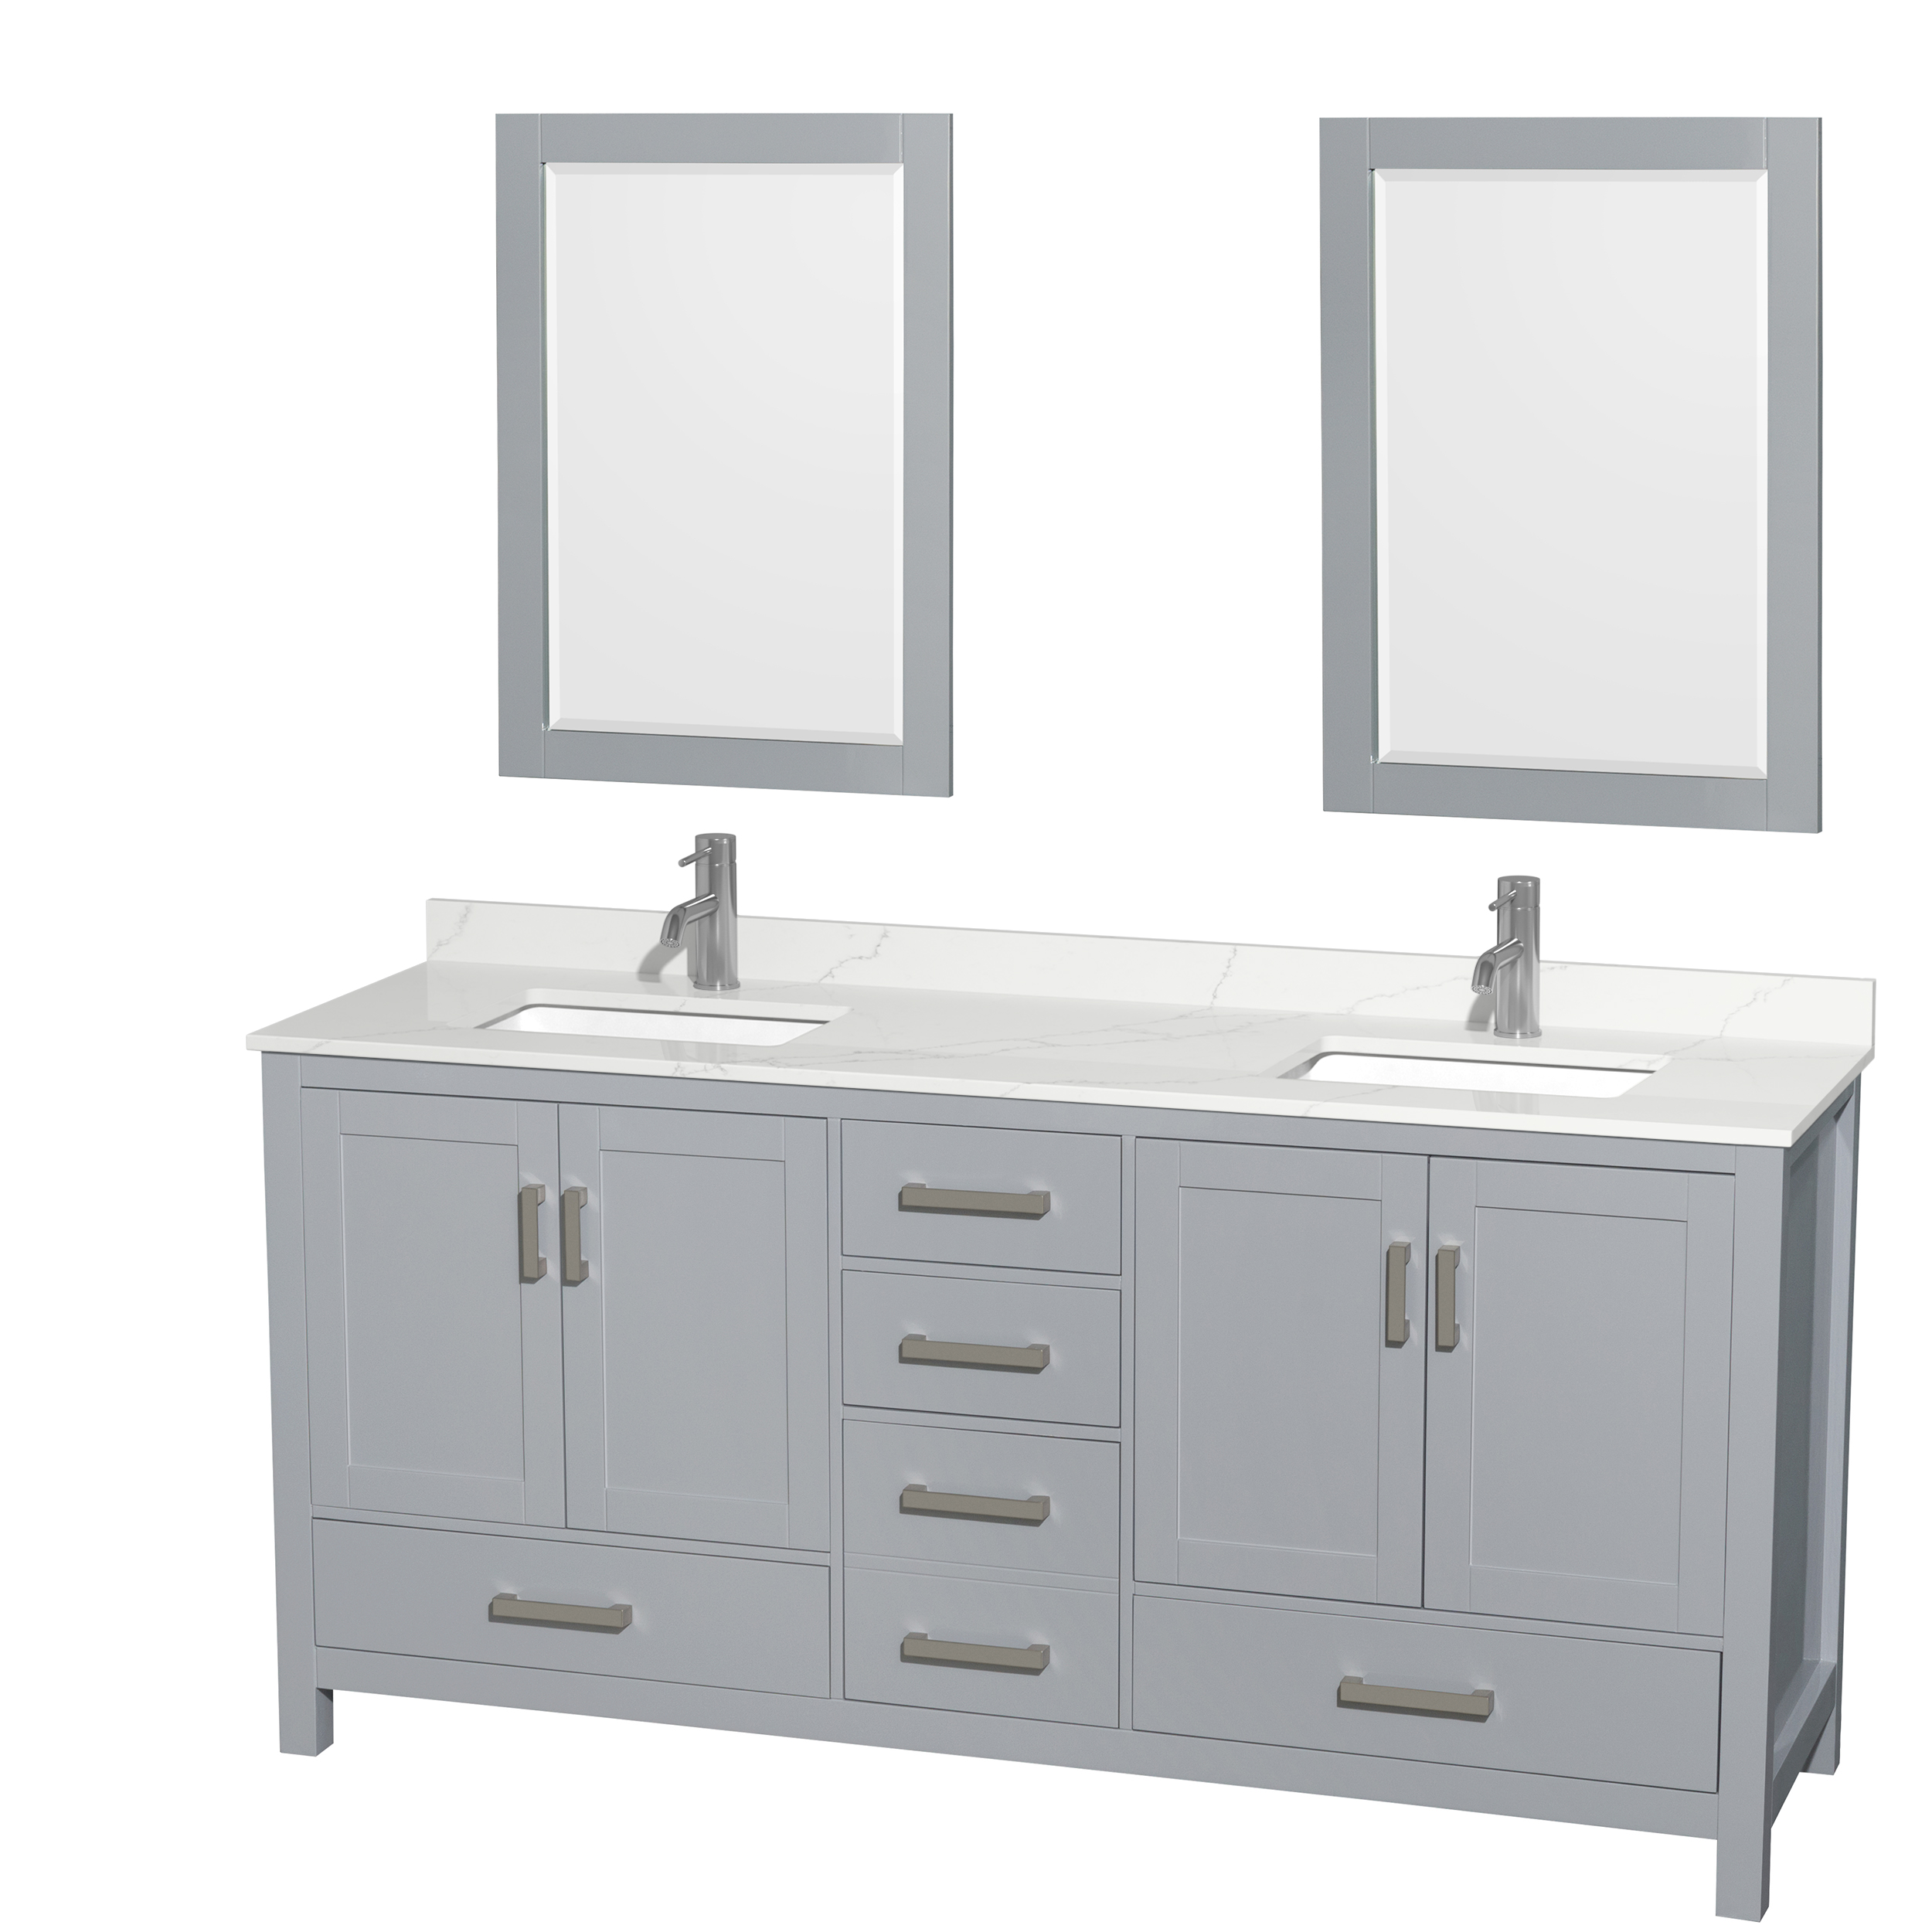 sheffield 72" double bathroom vanity by wyndham collection - gray